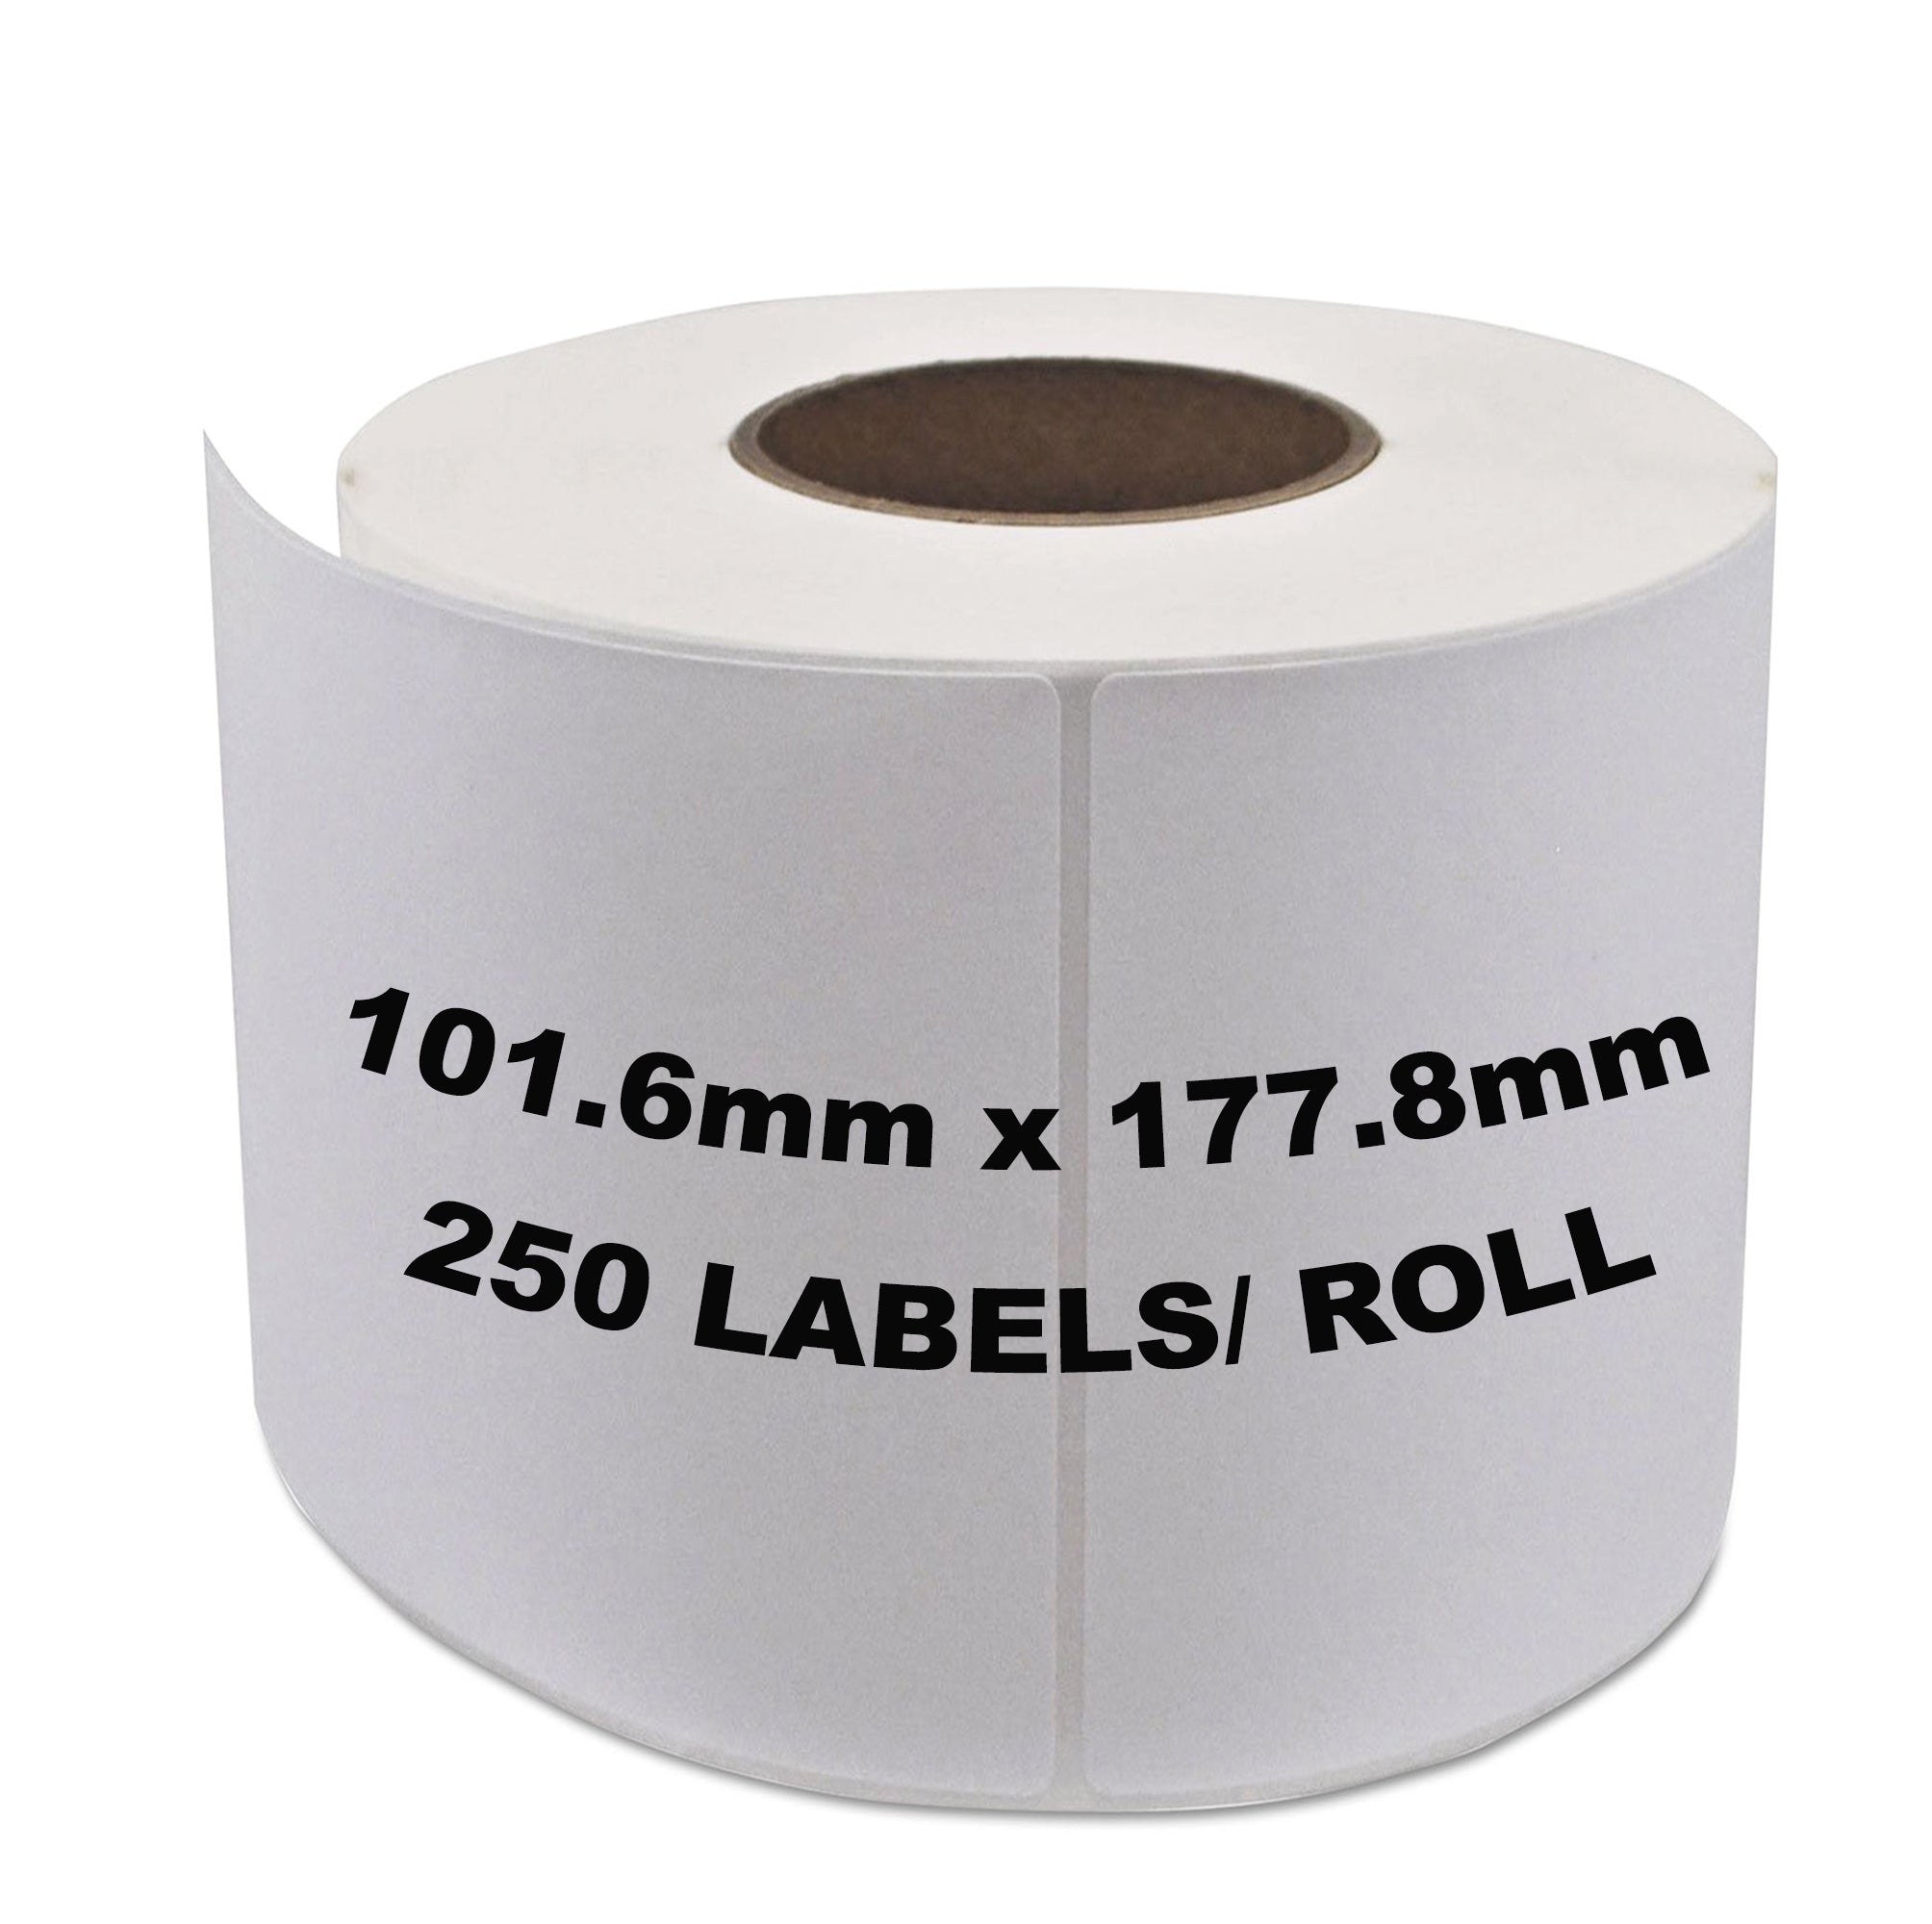 Direct Thermal 4x7 inch Labels 101.6x177.8mm 250 Labels/Roll [For Zebra Direct thermal Printers]